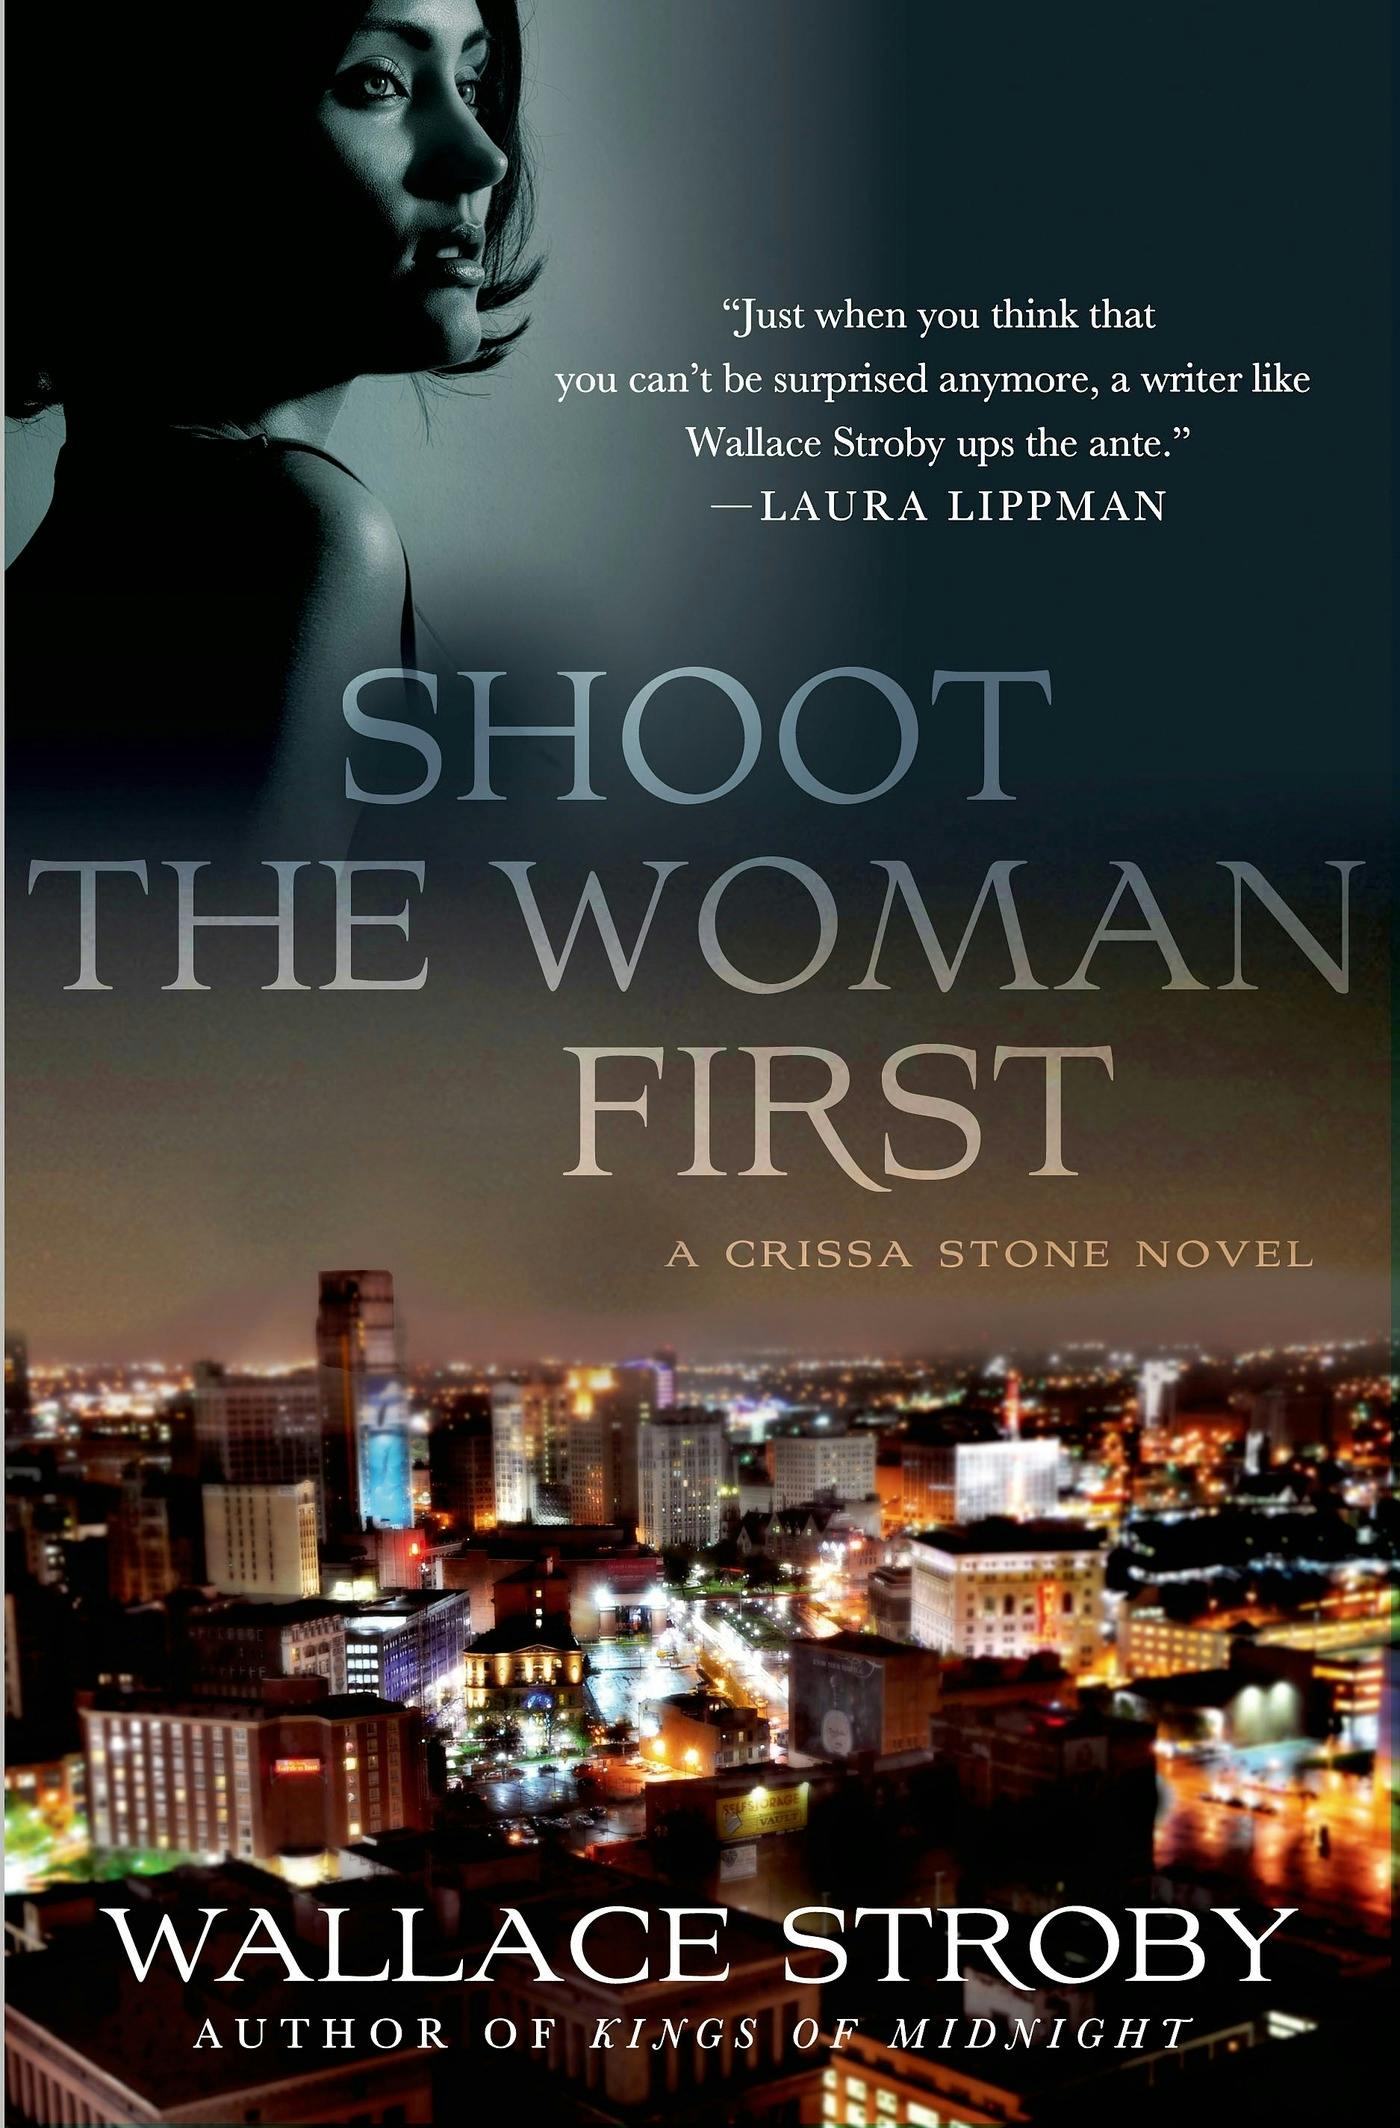 Image of Shoot the Woman First